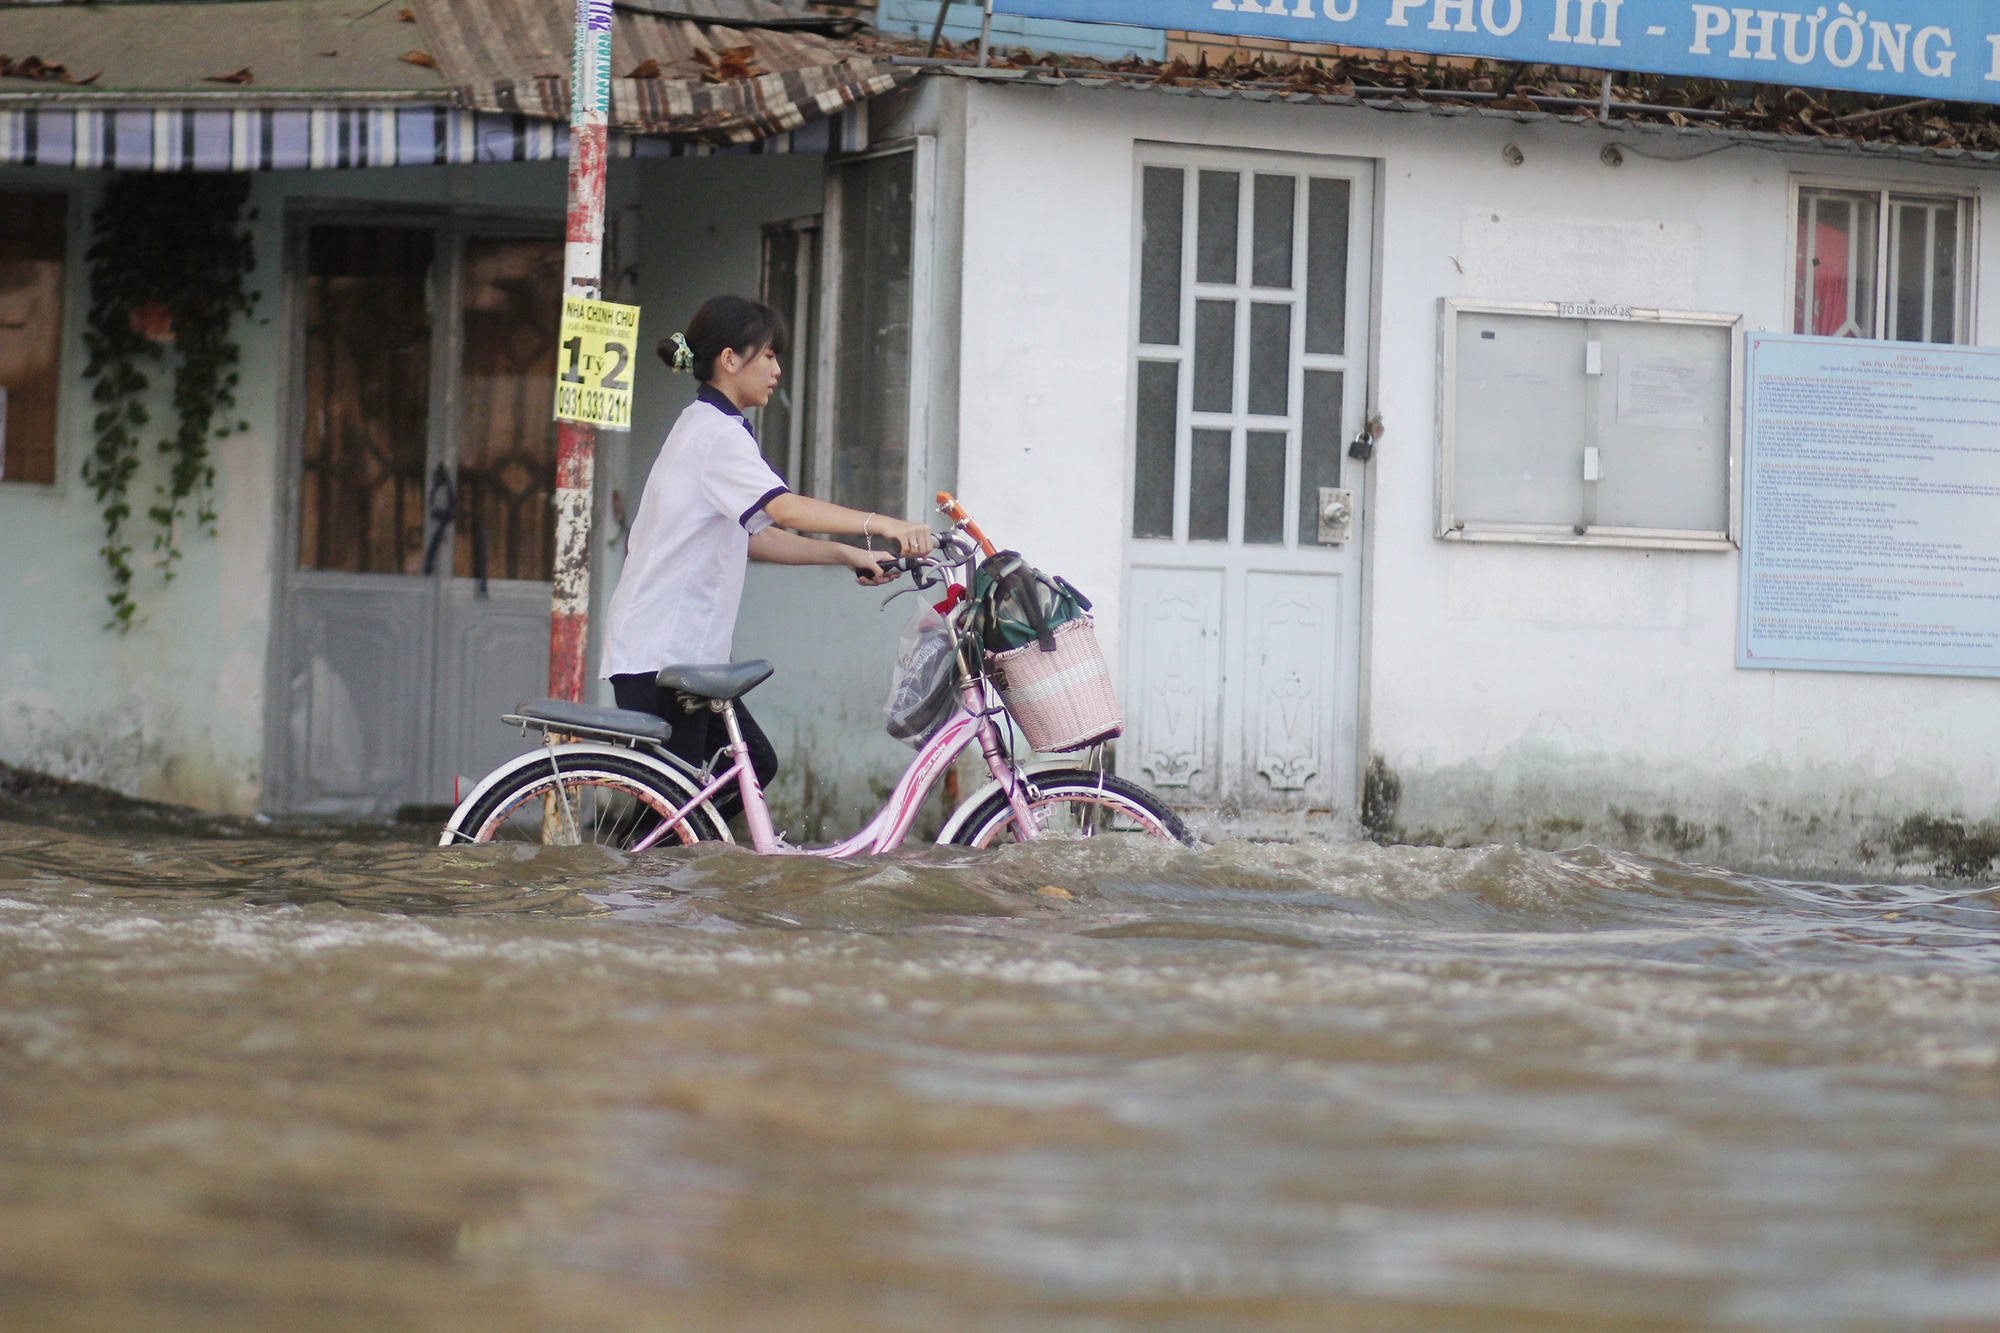 A student pushes her bicycle along a flooded street in Ho Chi Minh City, November 16, 2020. Photo: Kim Ut / Tuoi Tre